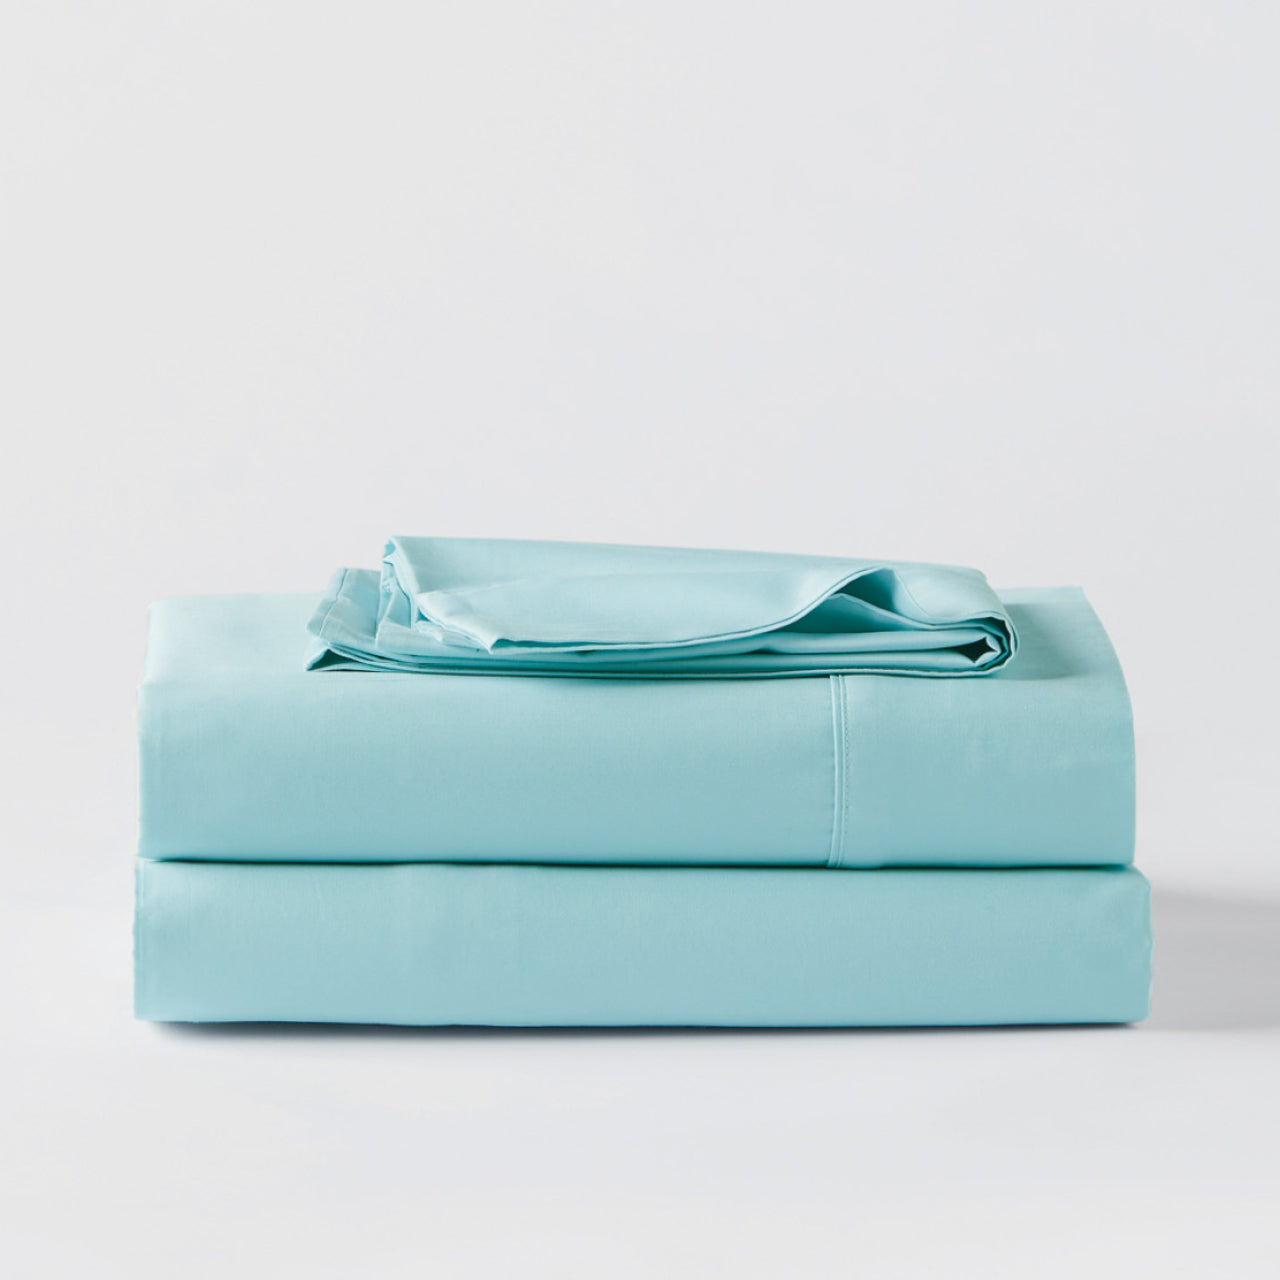 Premium Percale Eggshell Blue Sheets folded up on floor